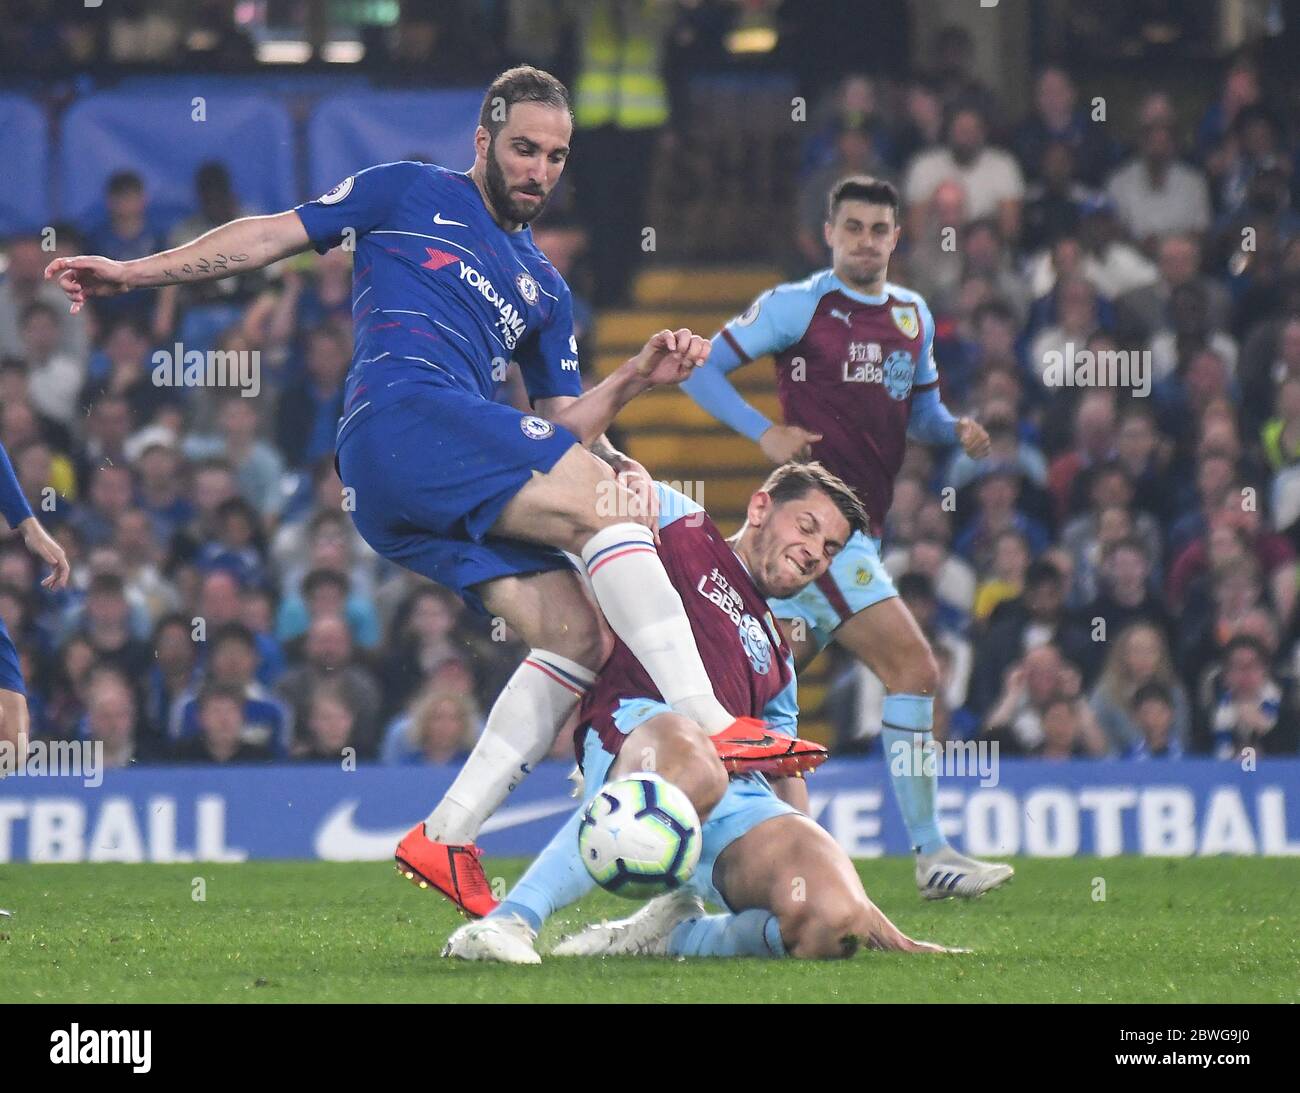 LONDON, ENGLAND - APRIL 22, 2019: Gonzalo Higuain of Chelsea pictured during the 2018/19 Premier League game between Chelsea FC and Burnley FC at Stam Stock Photo